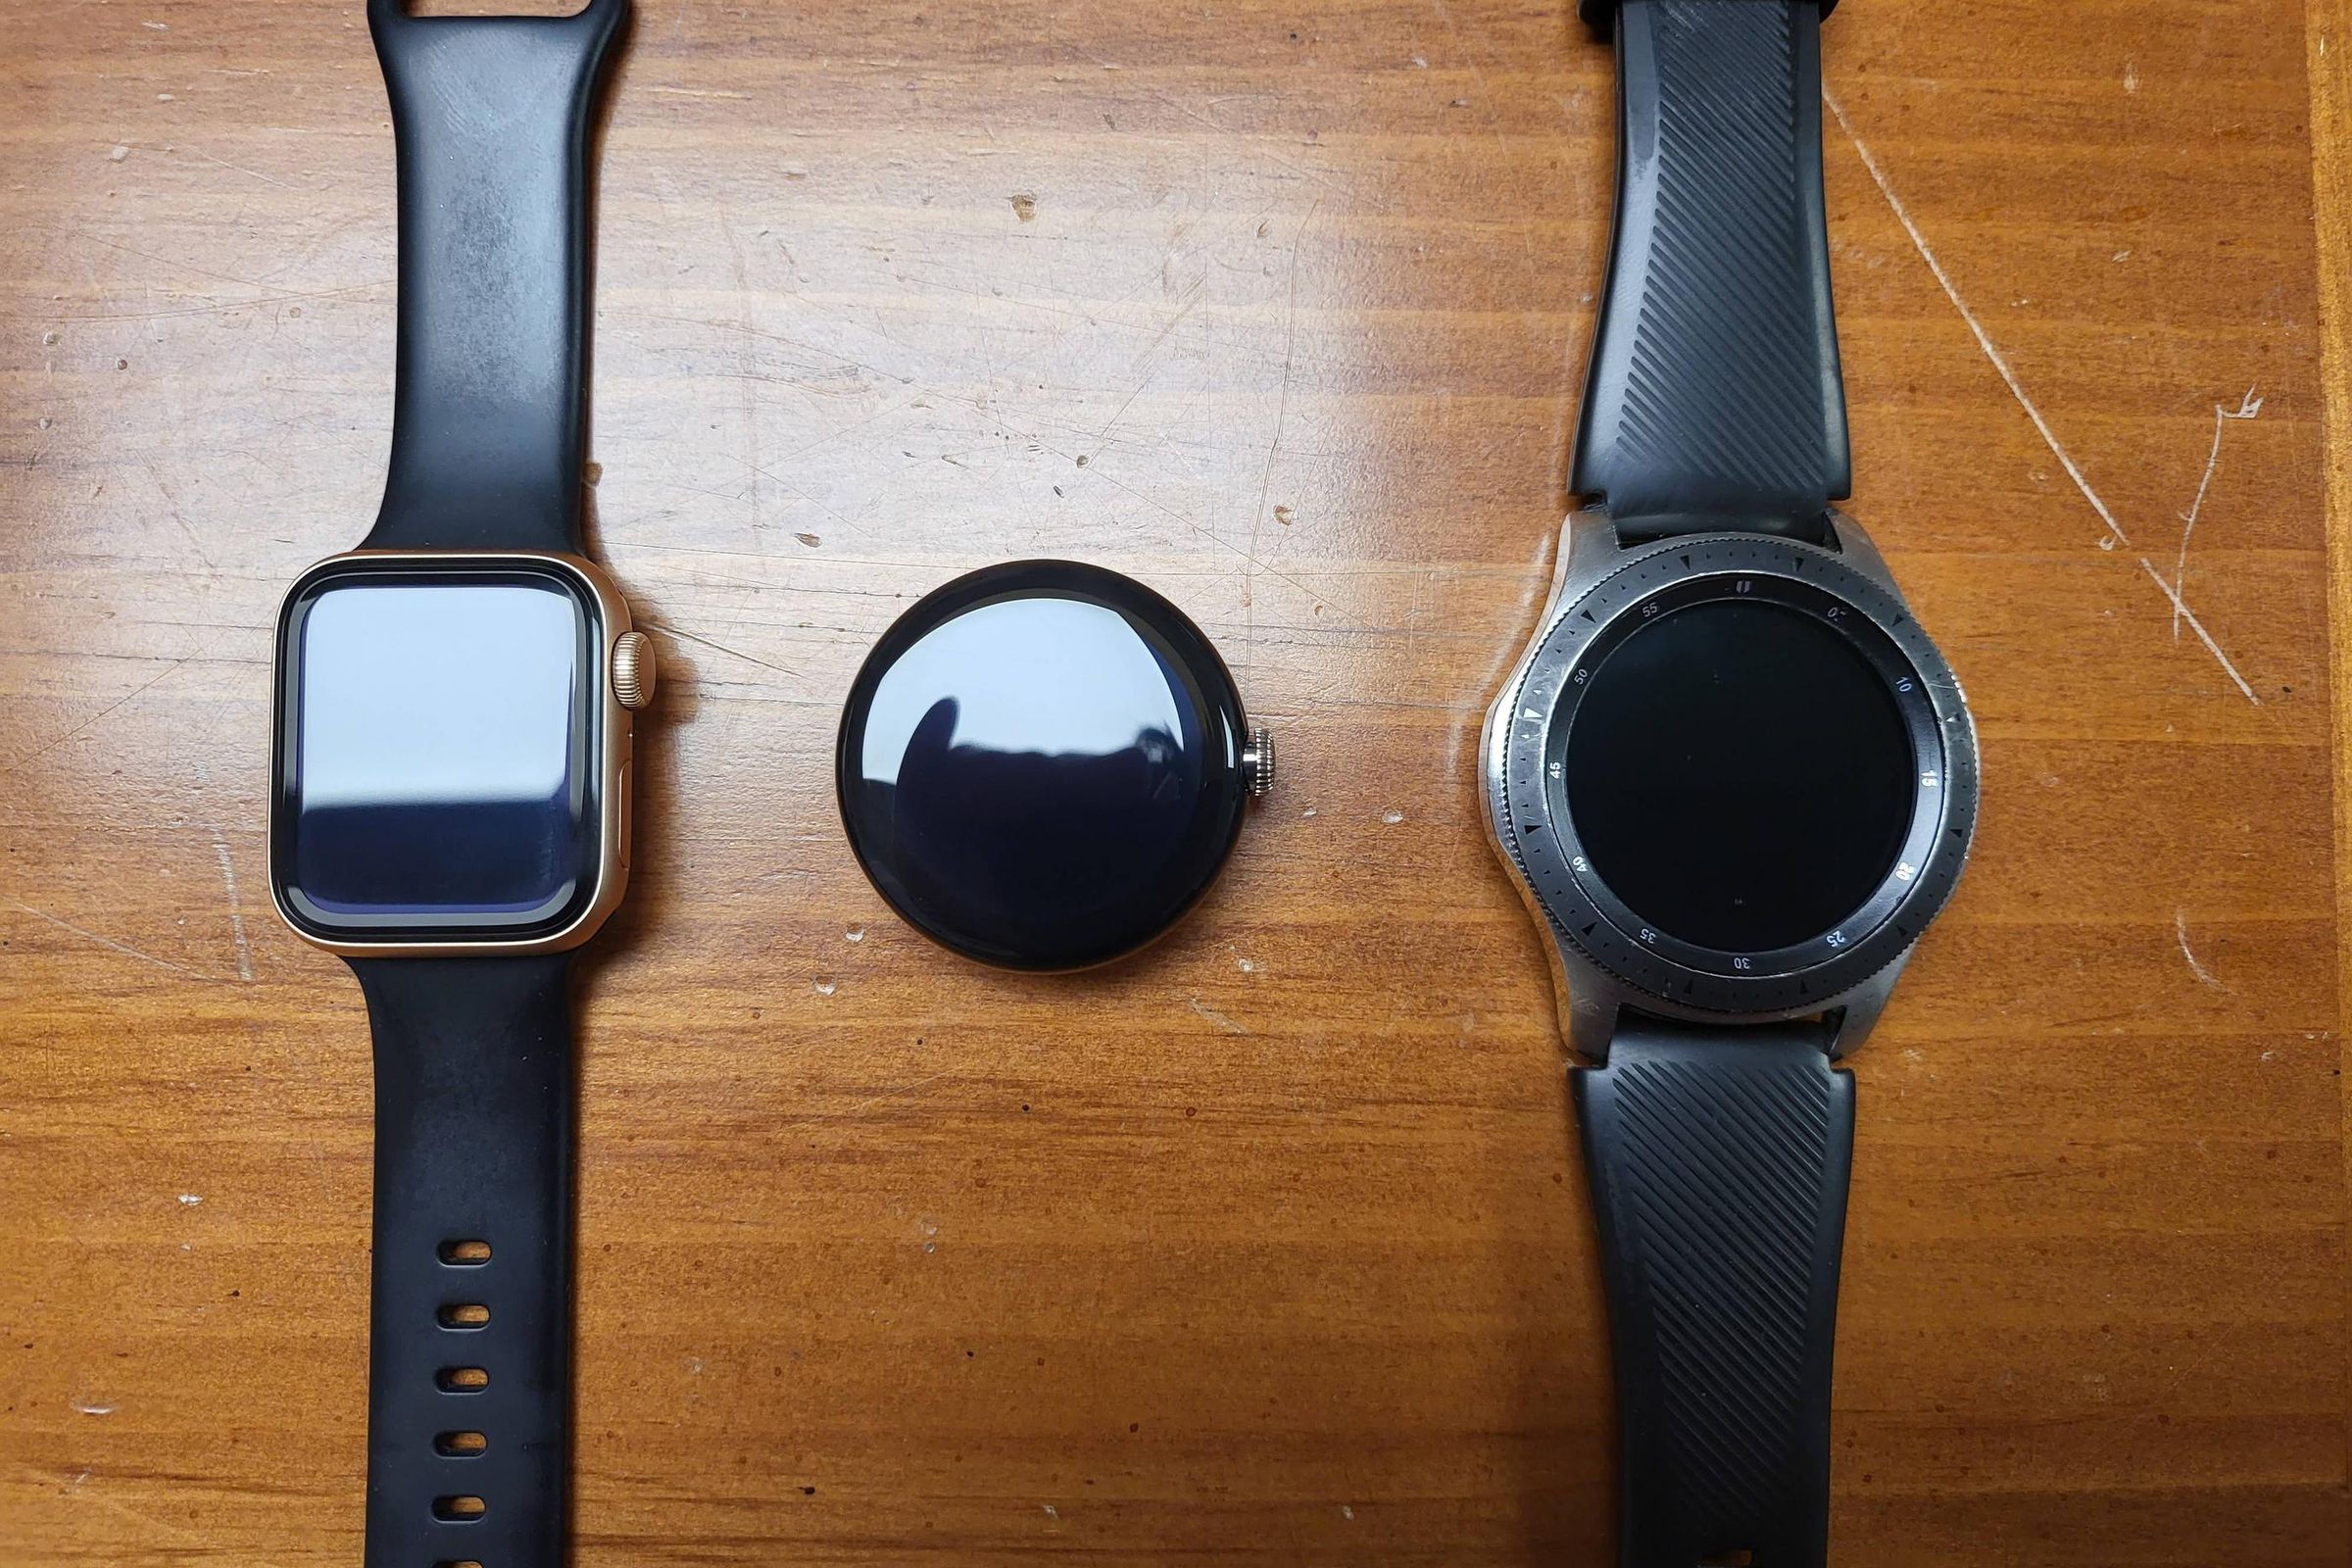 The Pixel Watch puck is in the middle.